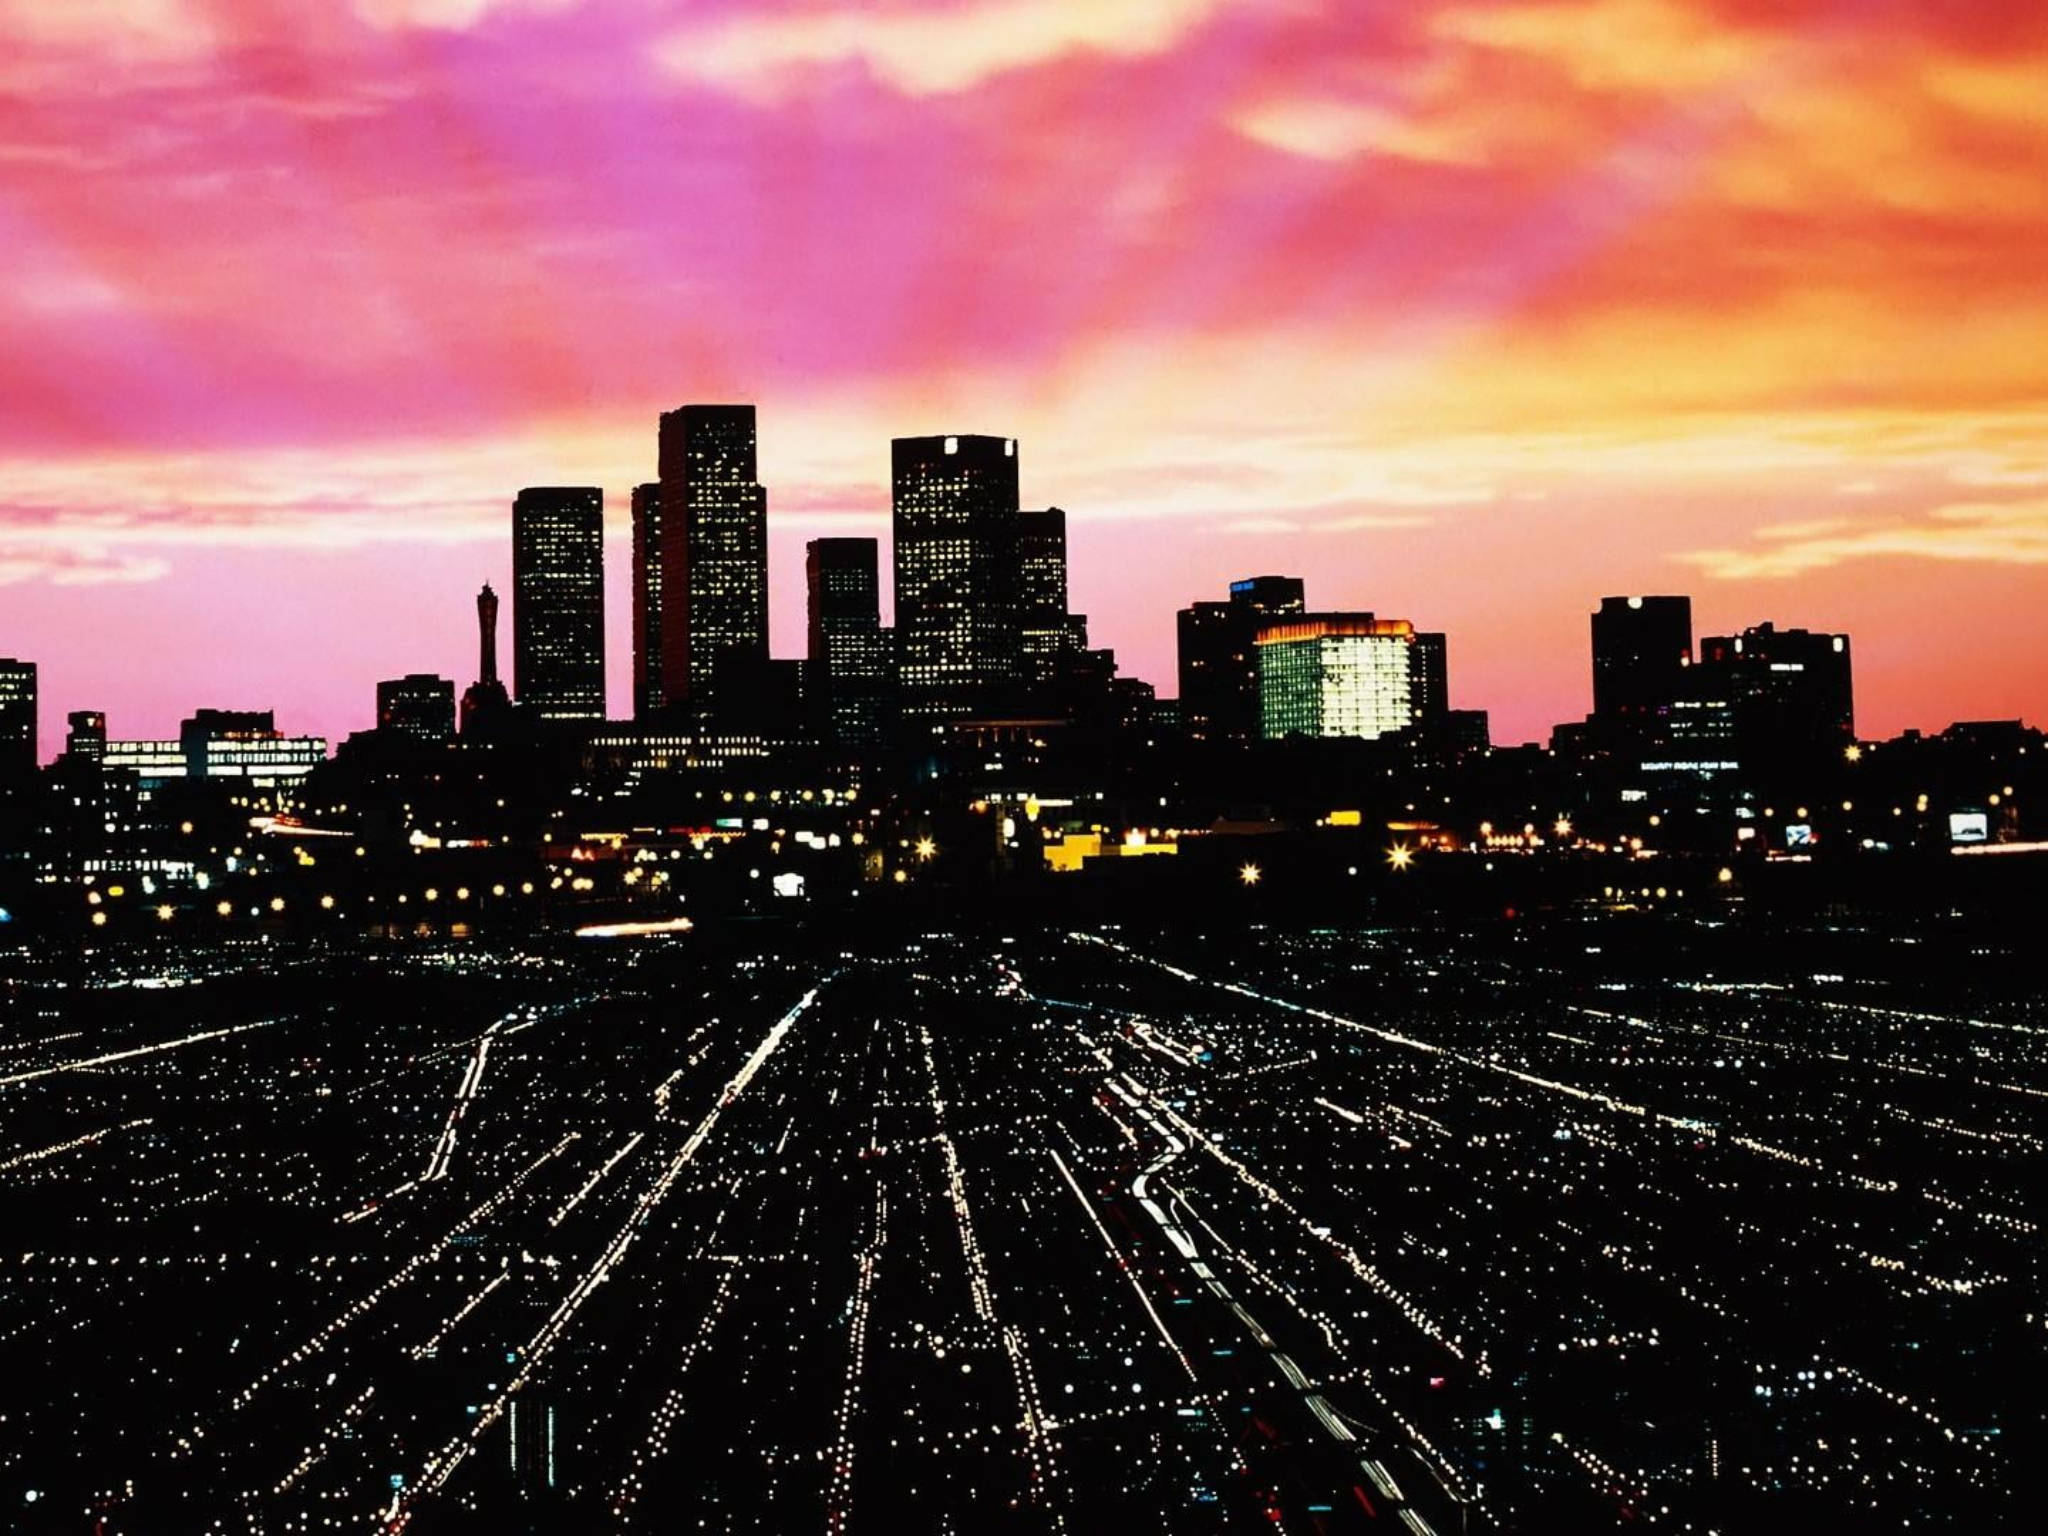 This image is a photo of a city skyline during sunset. The city skyline has multiple buildings of varying heights, and the photo is taken from a distance that includes a large highway filled with traffic. The sky is a mix of purple, pink, and orange colors due to the sunset. - Los Angeles